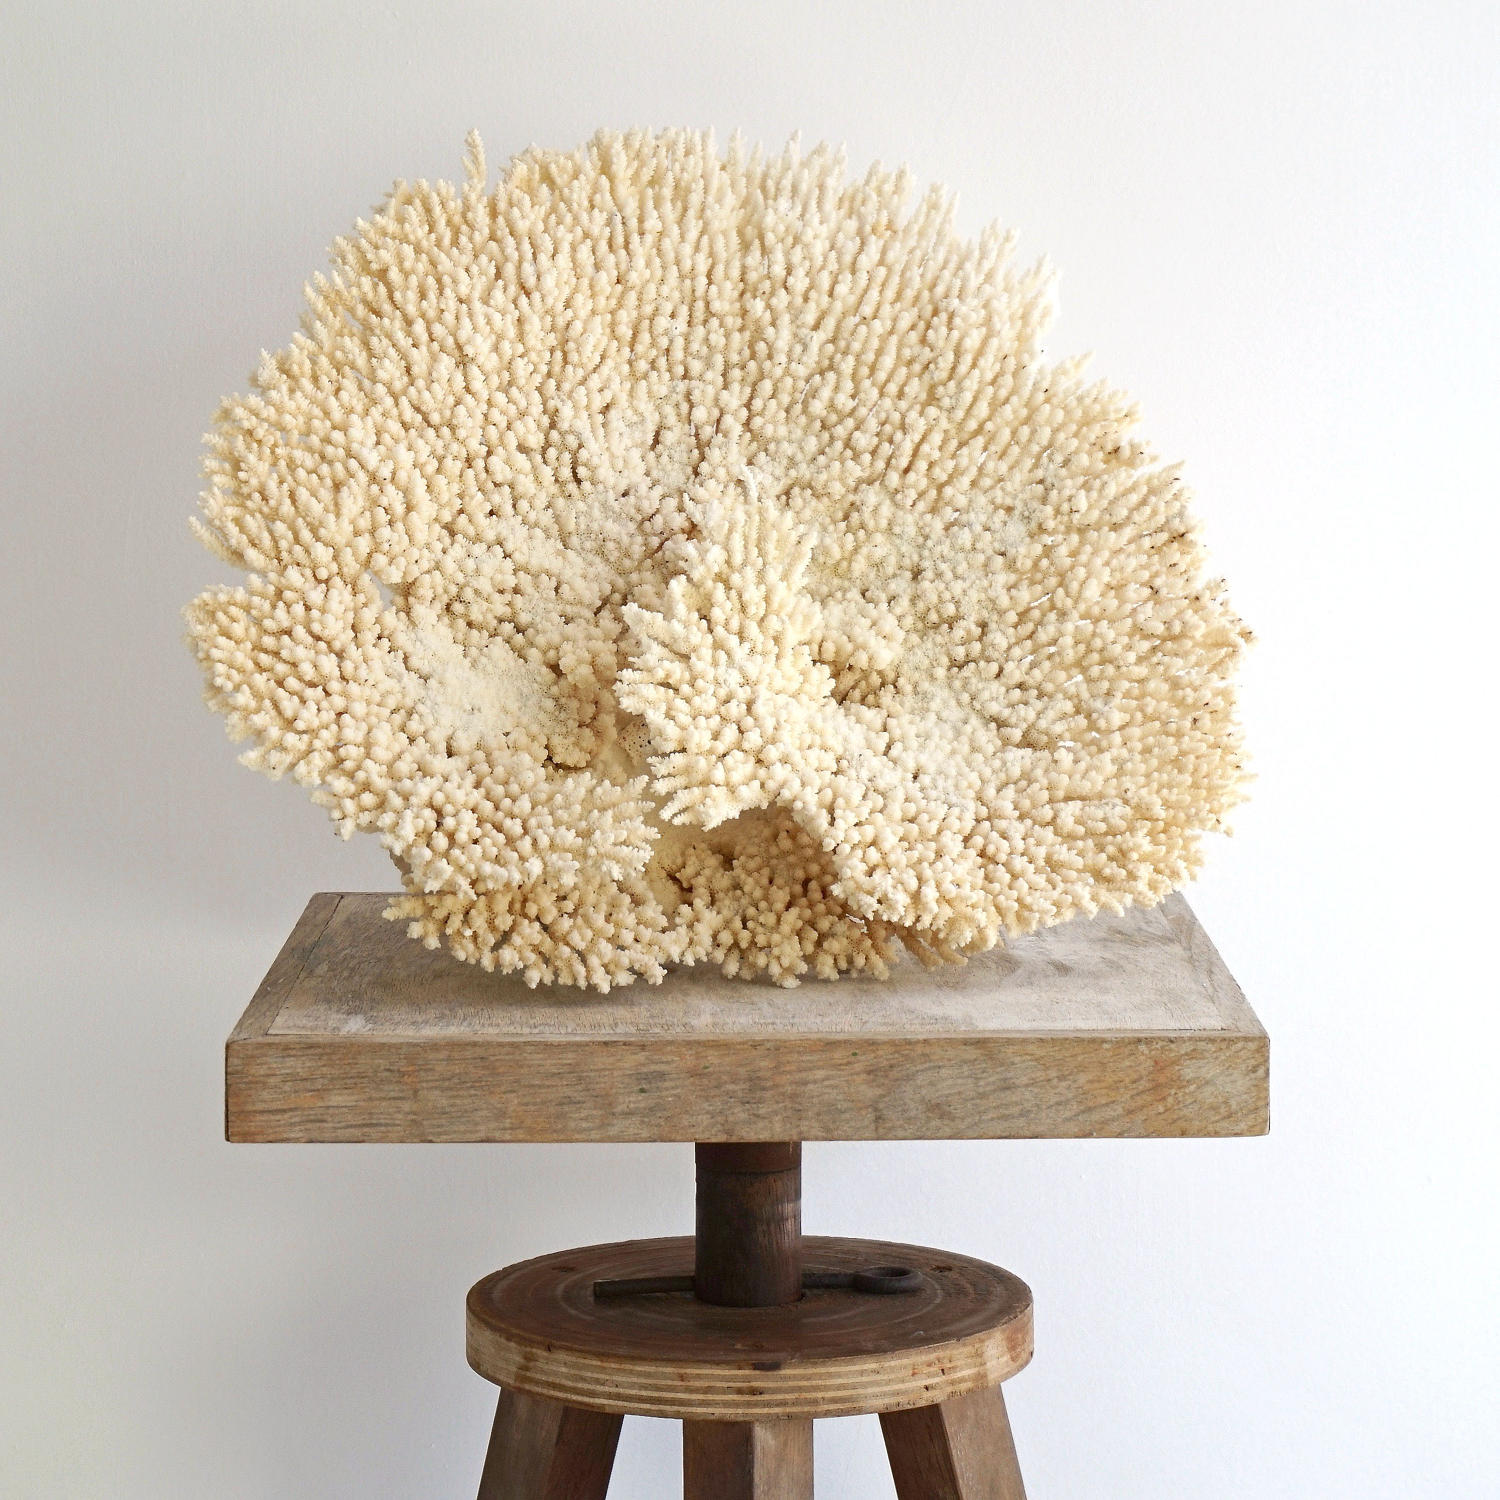 EXCEPTIONAL LARGE WHITE CORAL FRAGMENT